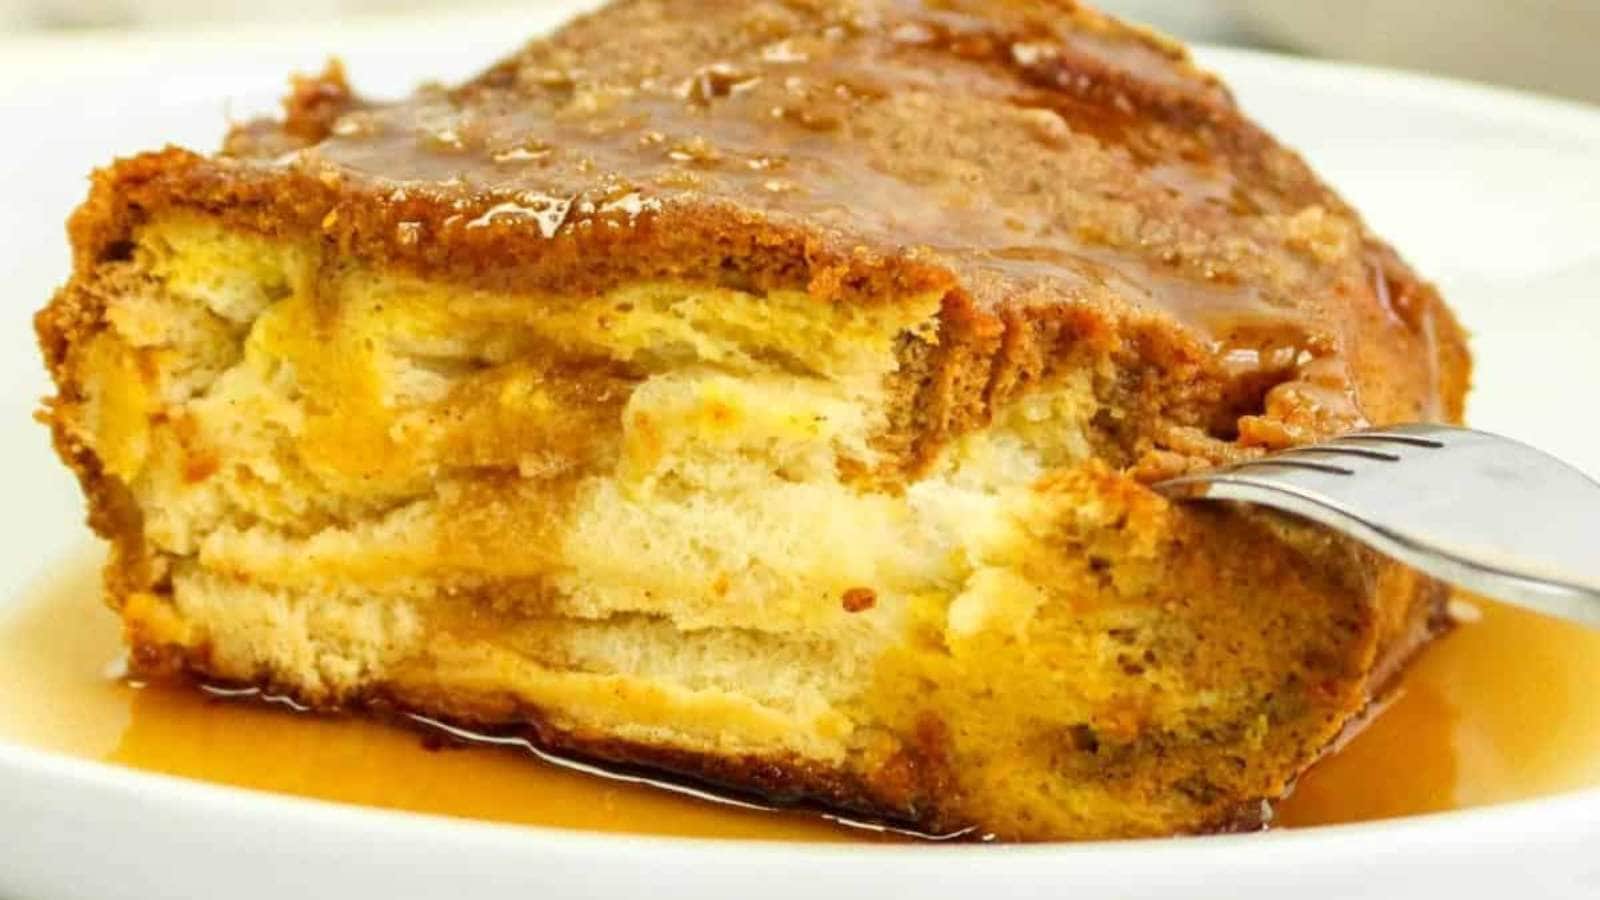 <p>Pumpkin French toast casserole is a delicious breakfast casserole made with bread, pumpkin pie spice seasoning, pumpkin puree, milk, and more. This French toast casserole is topped with a brown sugar crumble.</p><p><strong>Get the Recipe: <a href="https://www.kimschob.com/pumpkin-french-toast-casserole" rel="noreferrer noopener">Pumpkin French Toast Casserole</a></strong></p>